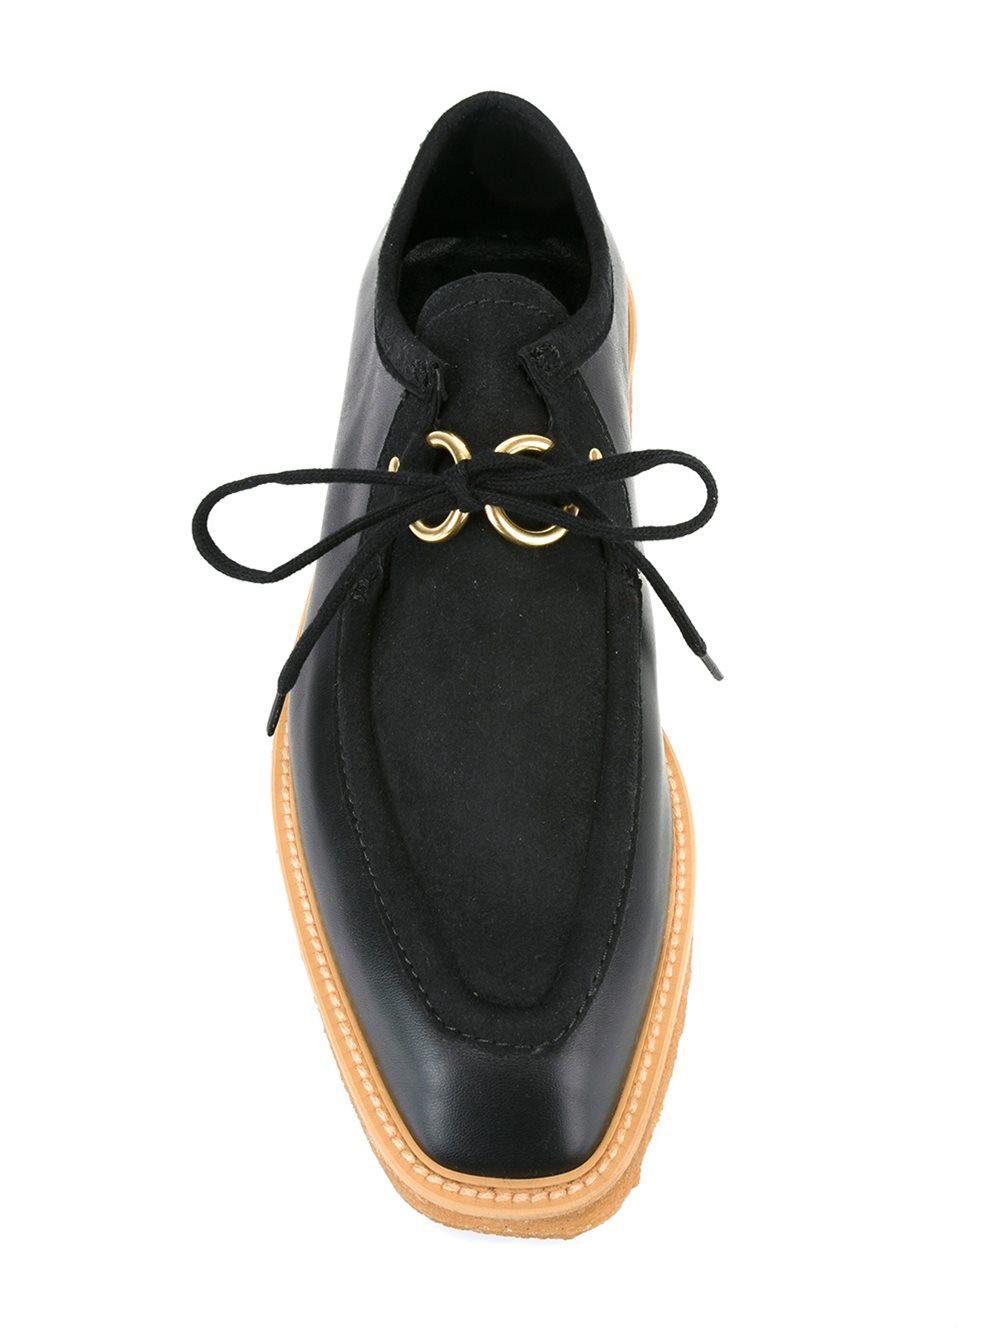 Stella McCartney Leather Brody Chunky Shoes in Black - Lyst